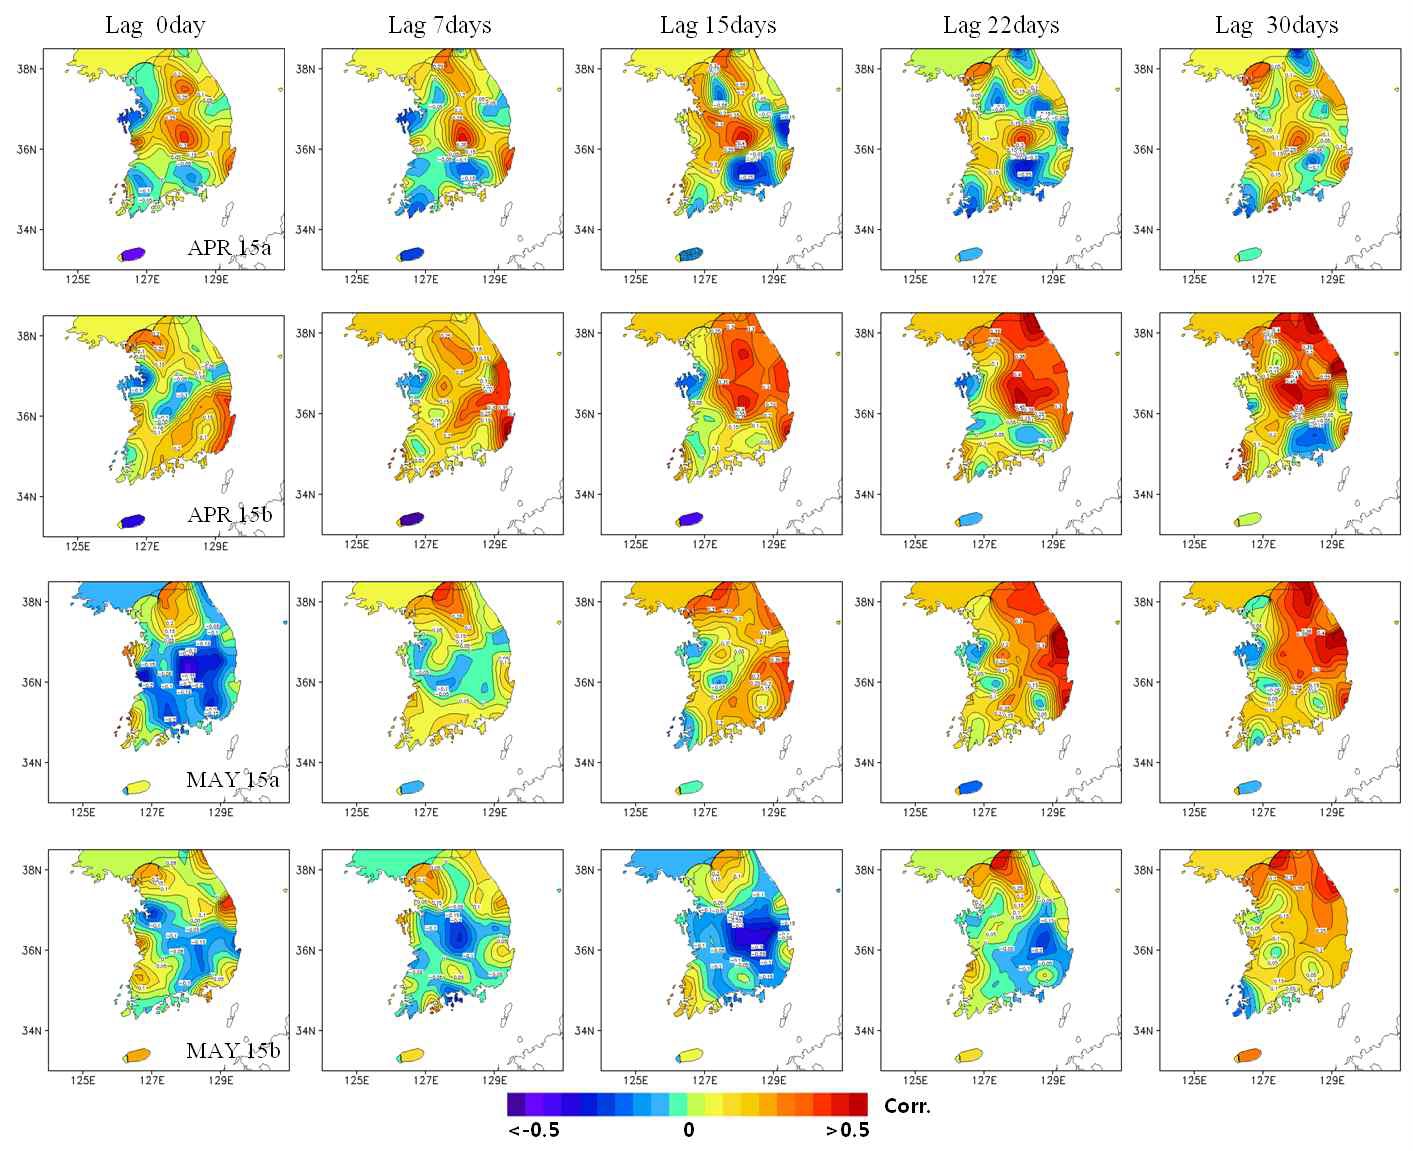 Fig. 3.4.32. The correlation between vegetation and temperature according to the lag time at South Korea in April and May